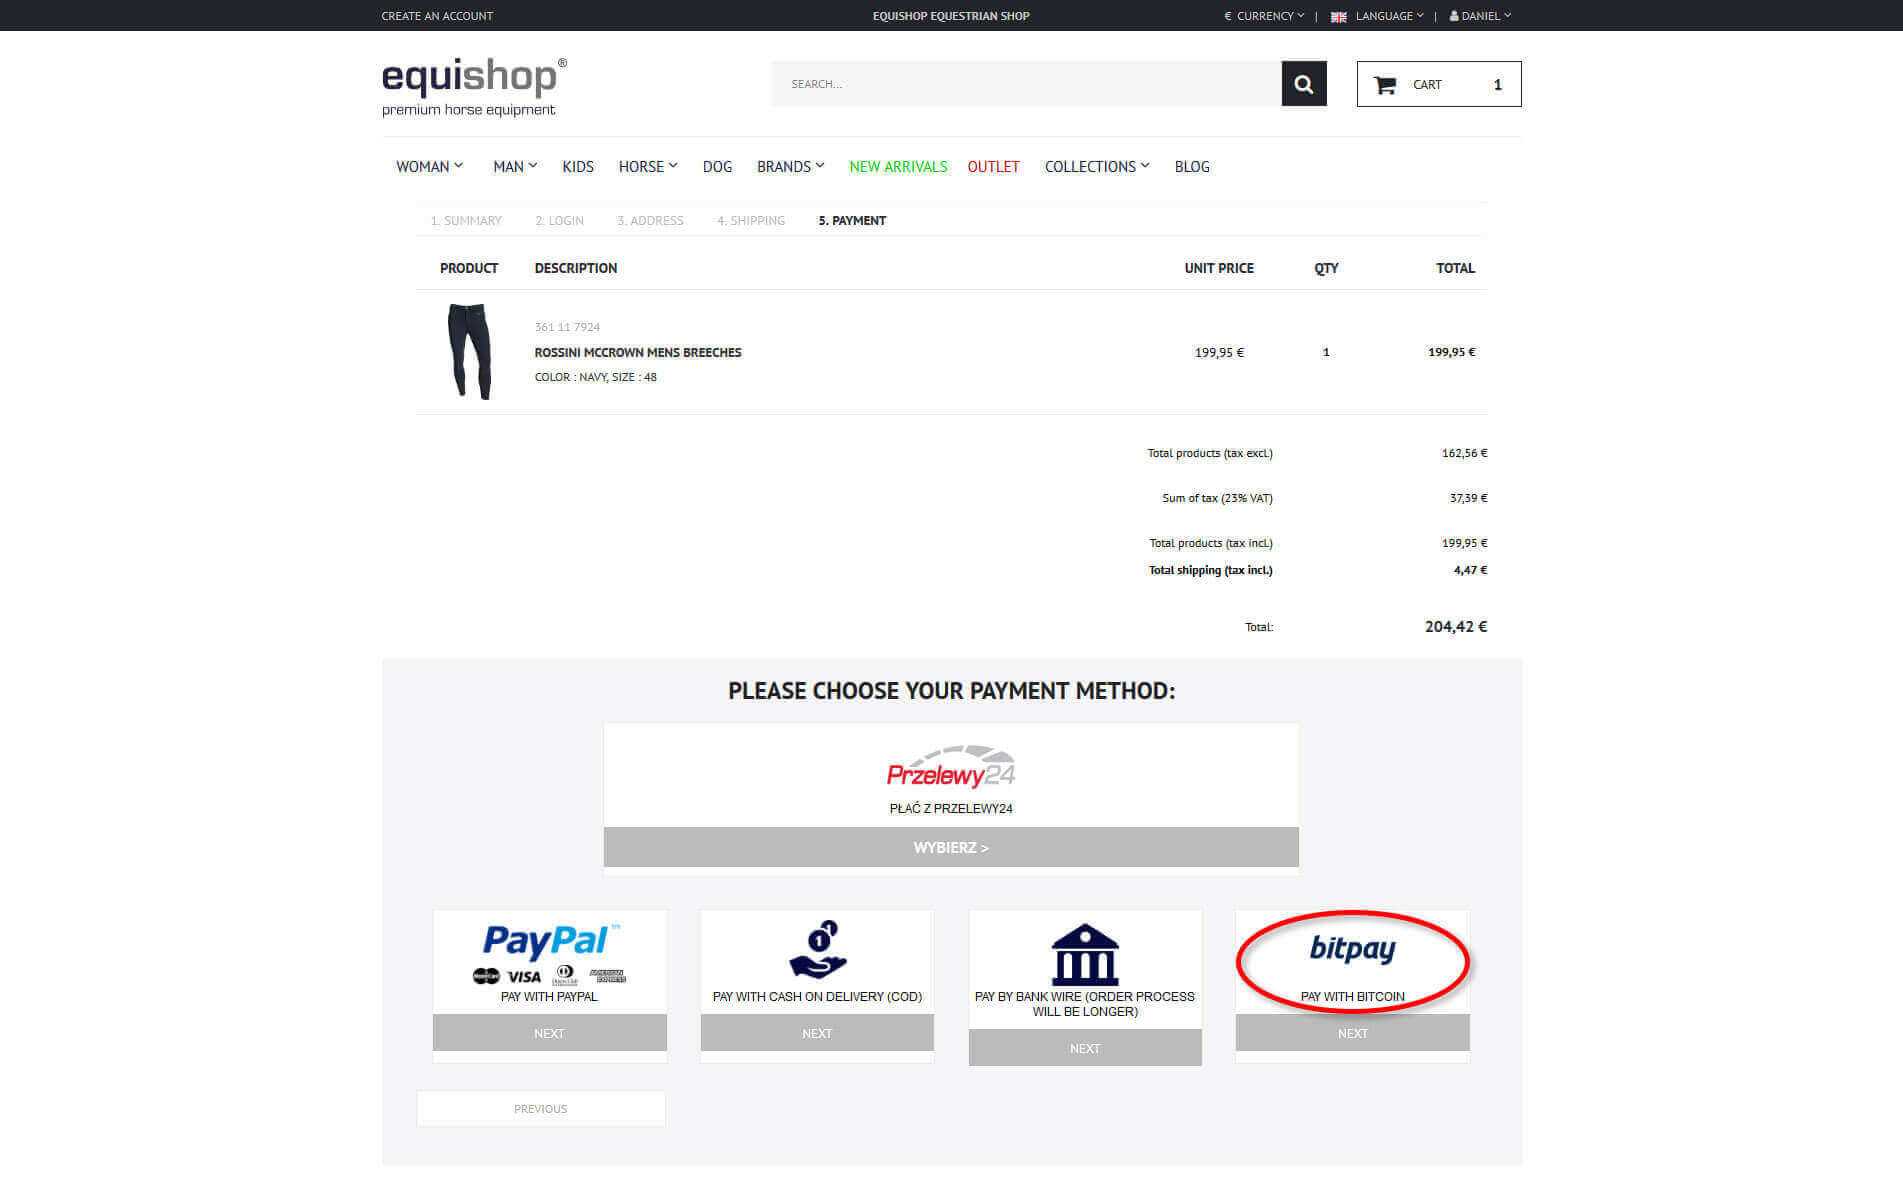 How to choose Bitcoin payment in Equishop?